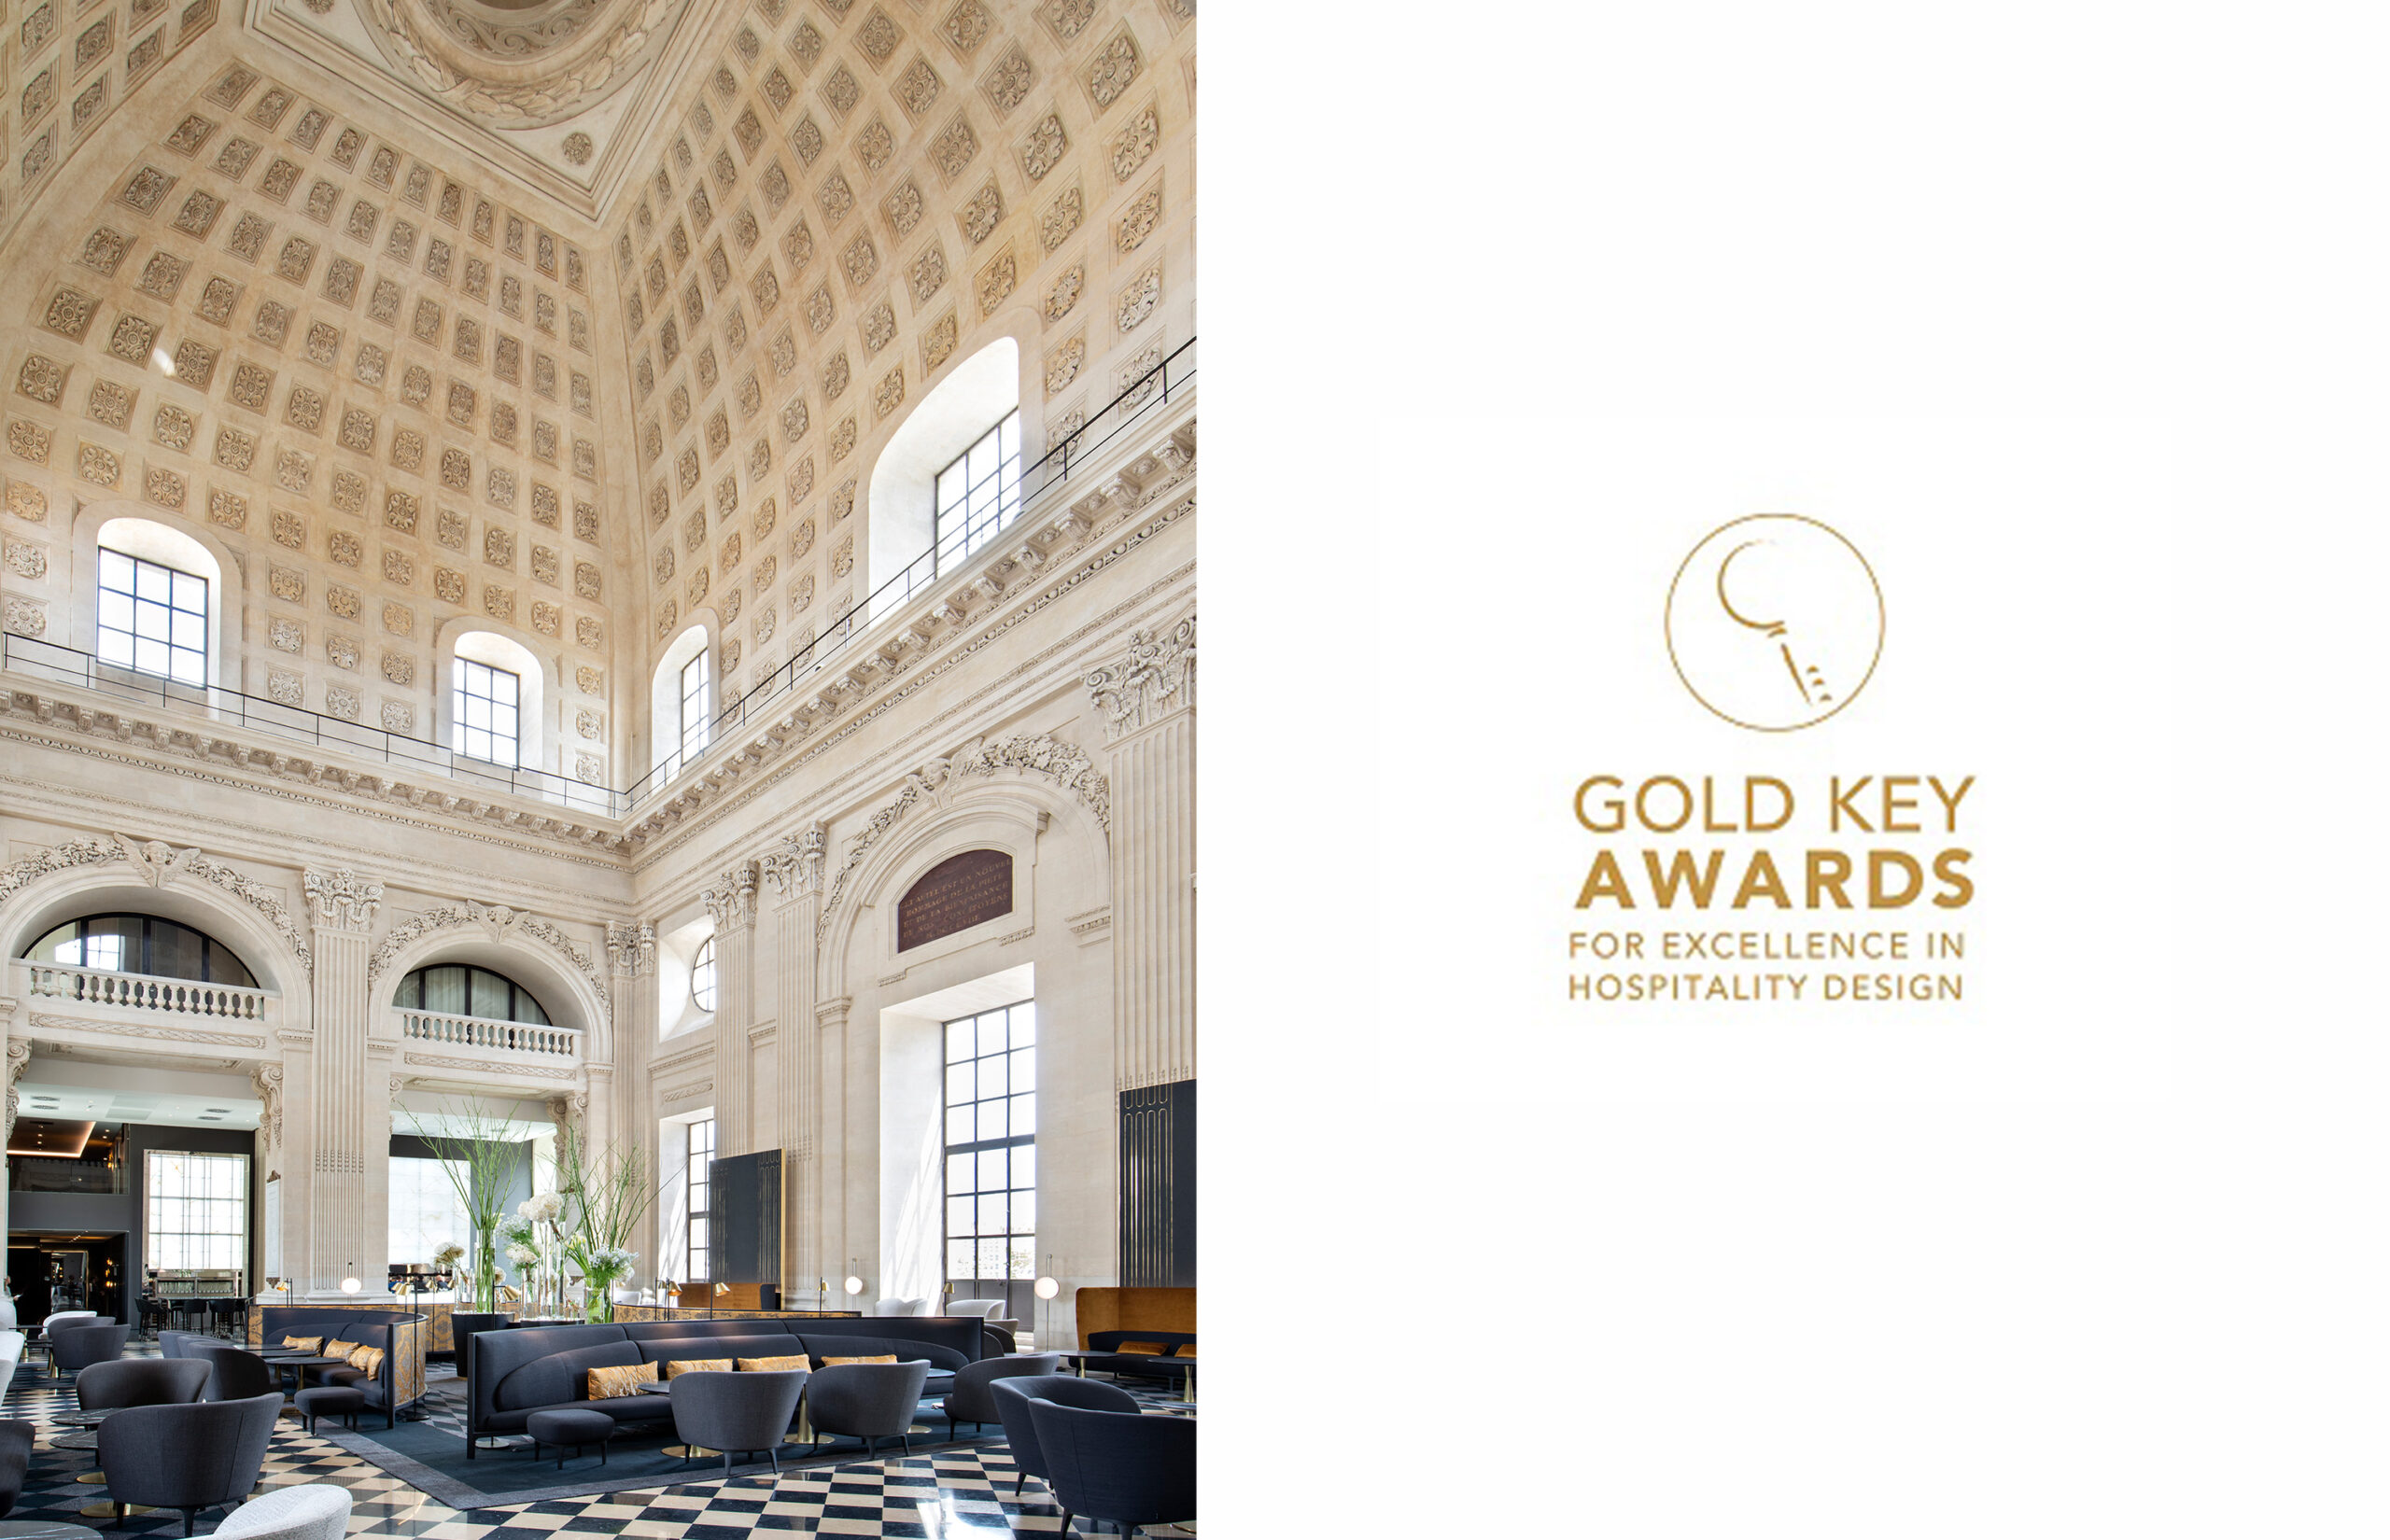 gold key awards 2019 won by the interior design studio jean-philippe nuel for the intercontinental lyon hotel dieu